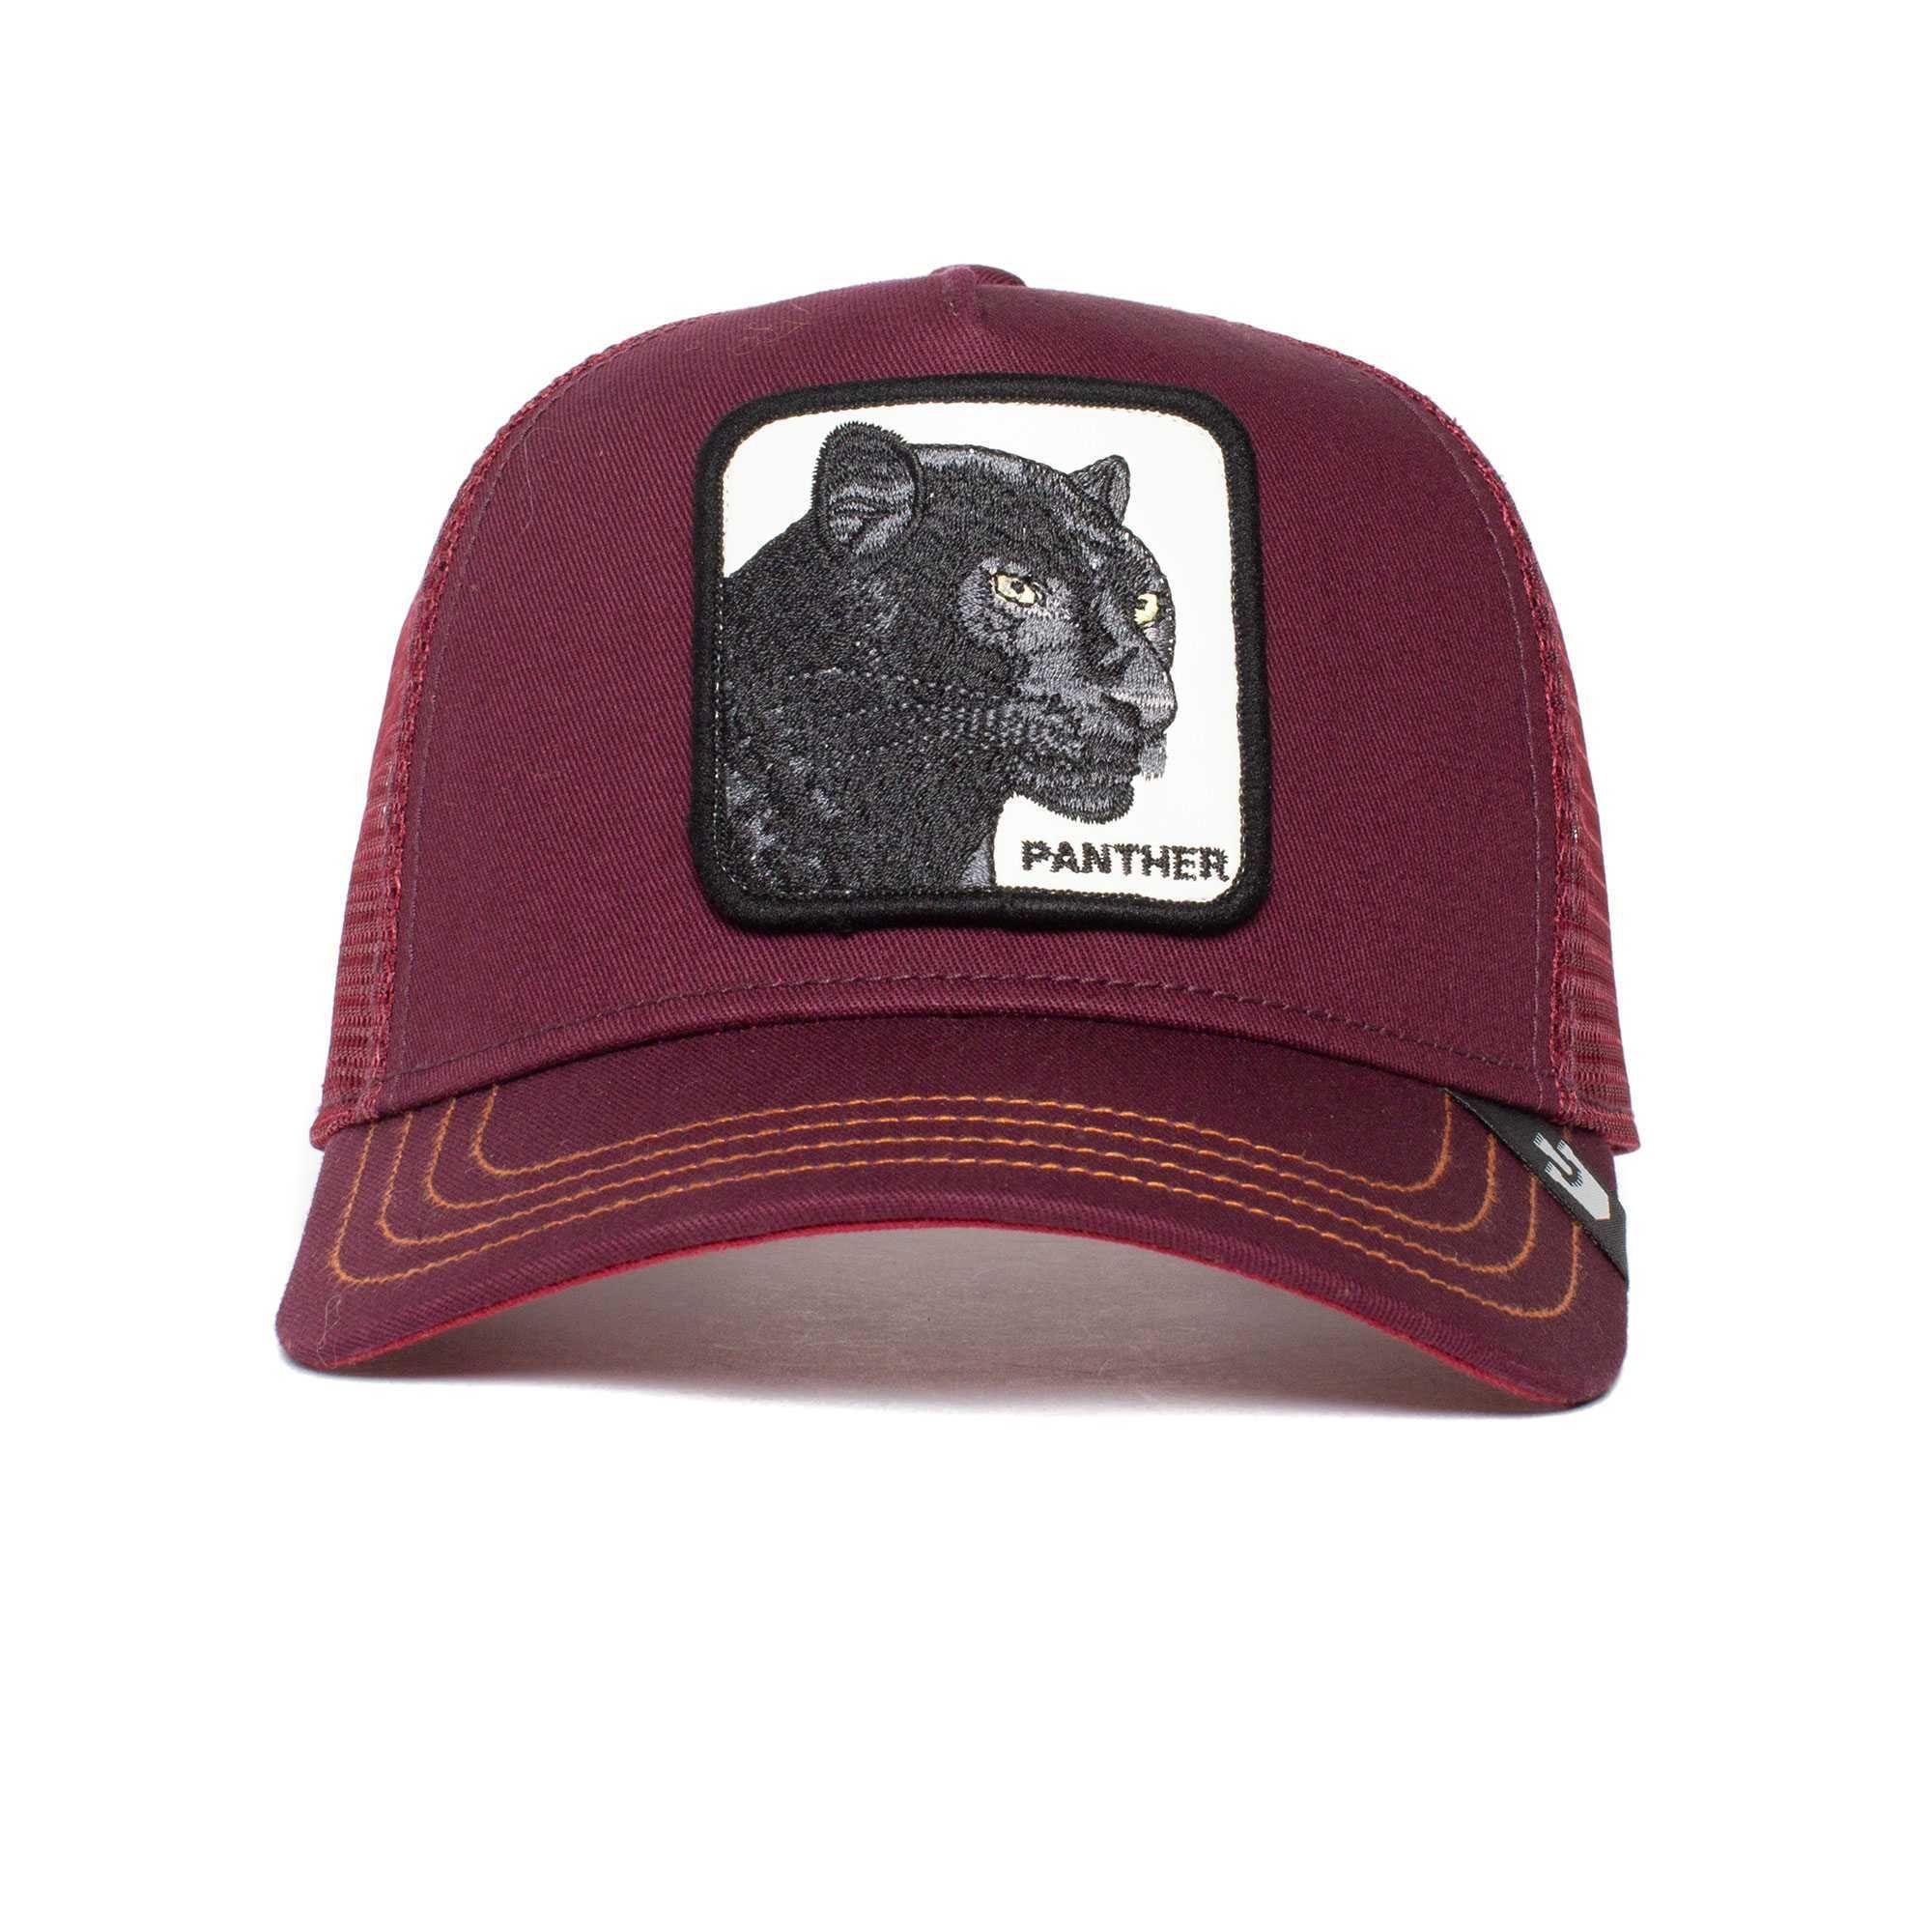 GOORIN Bros. Baseball Unisex Cap maroon Panther - Size One Frontpatch, The Trucker Cap Kappe